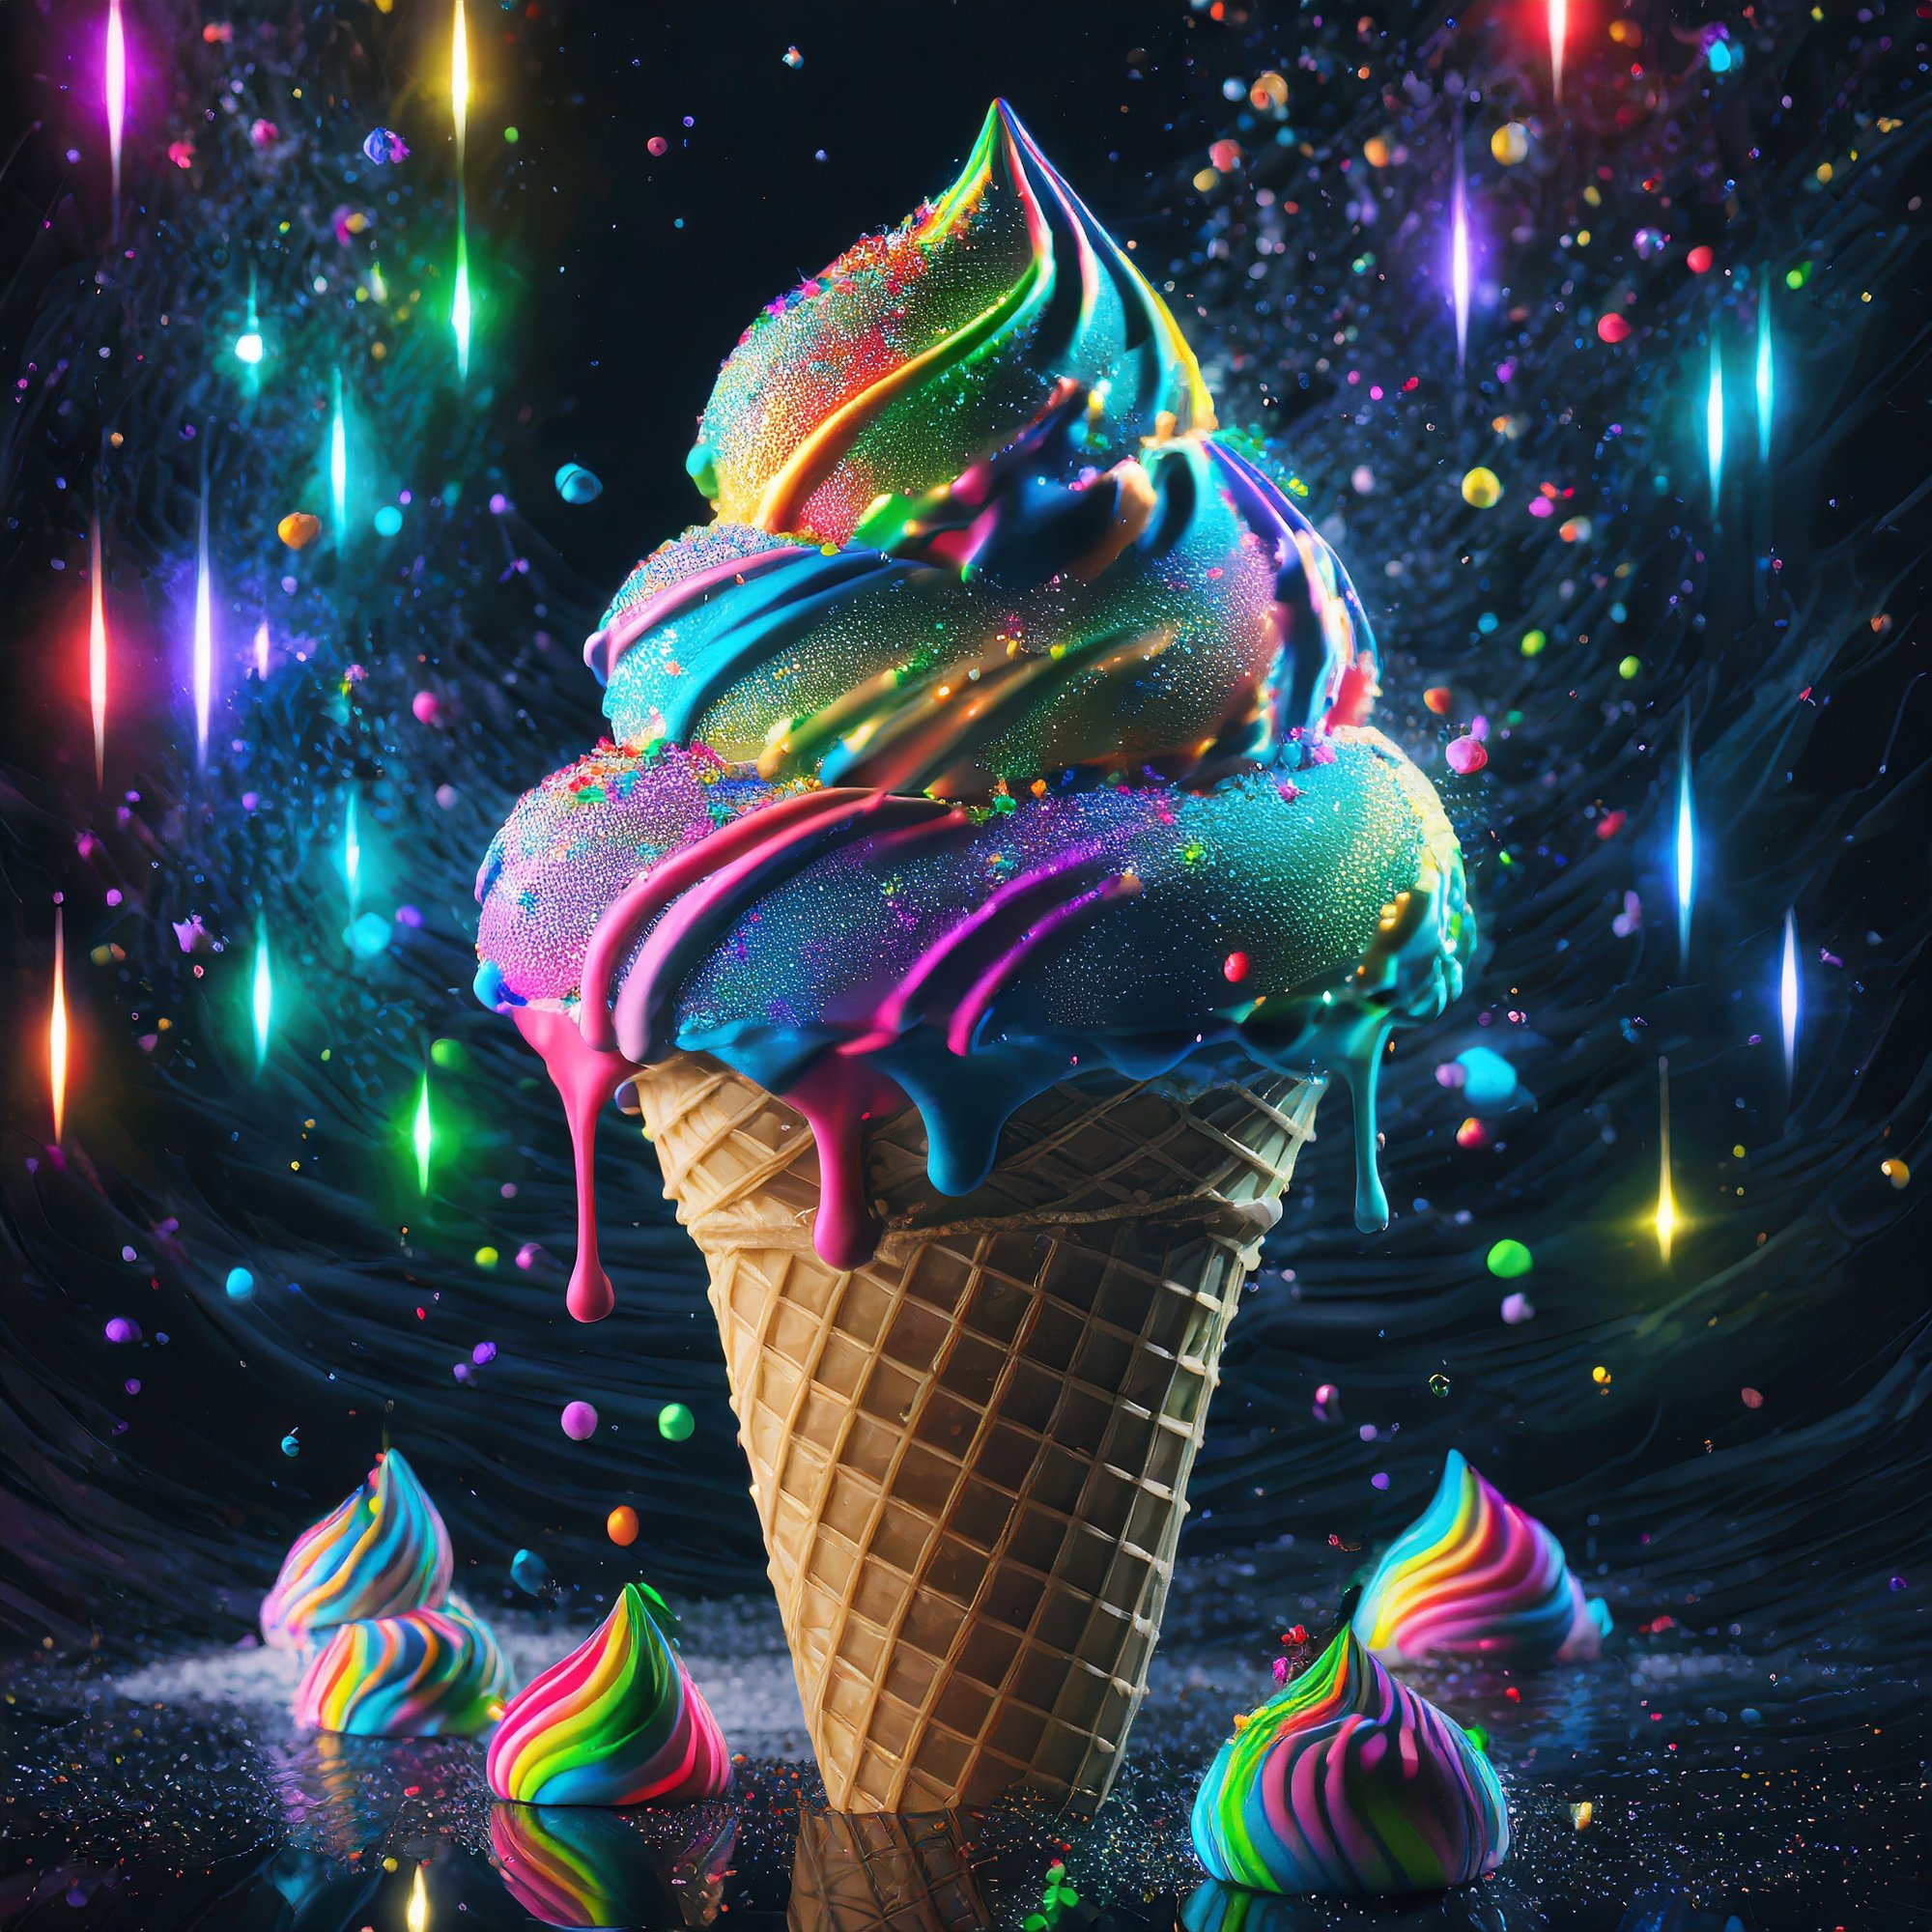 Firefly Sugar Cone in full dispaly filled with rainbow soft ice cream 32587